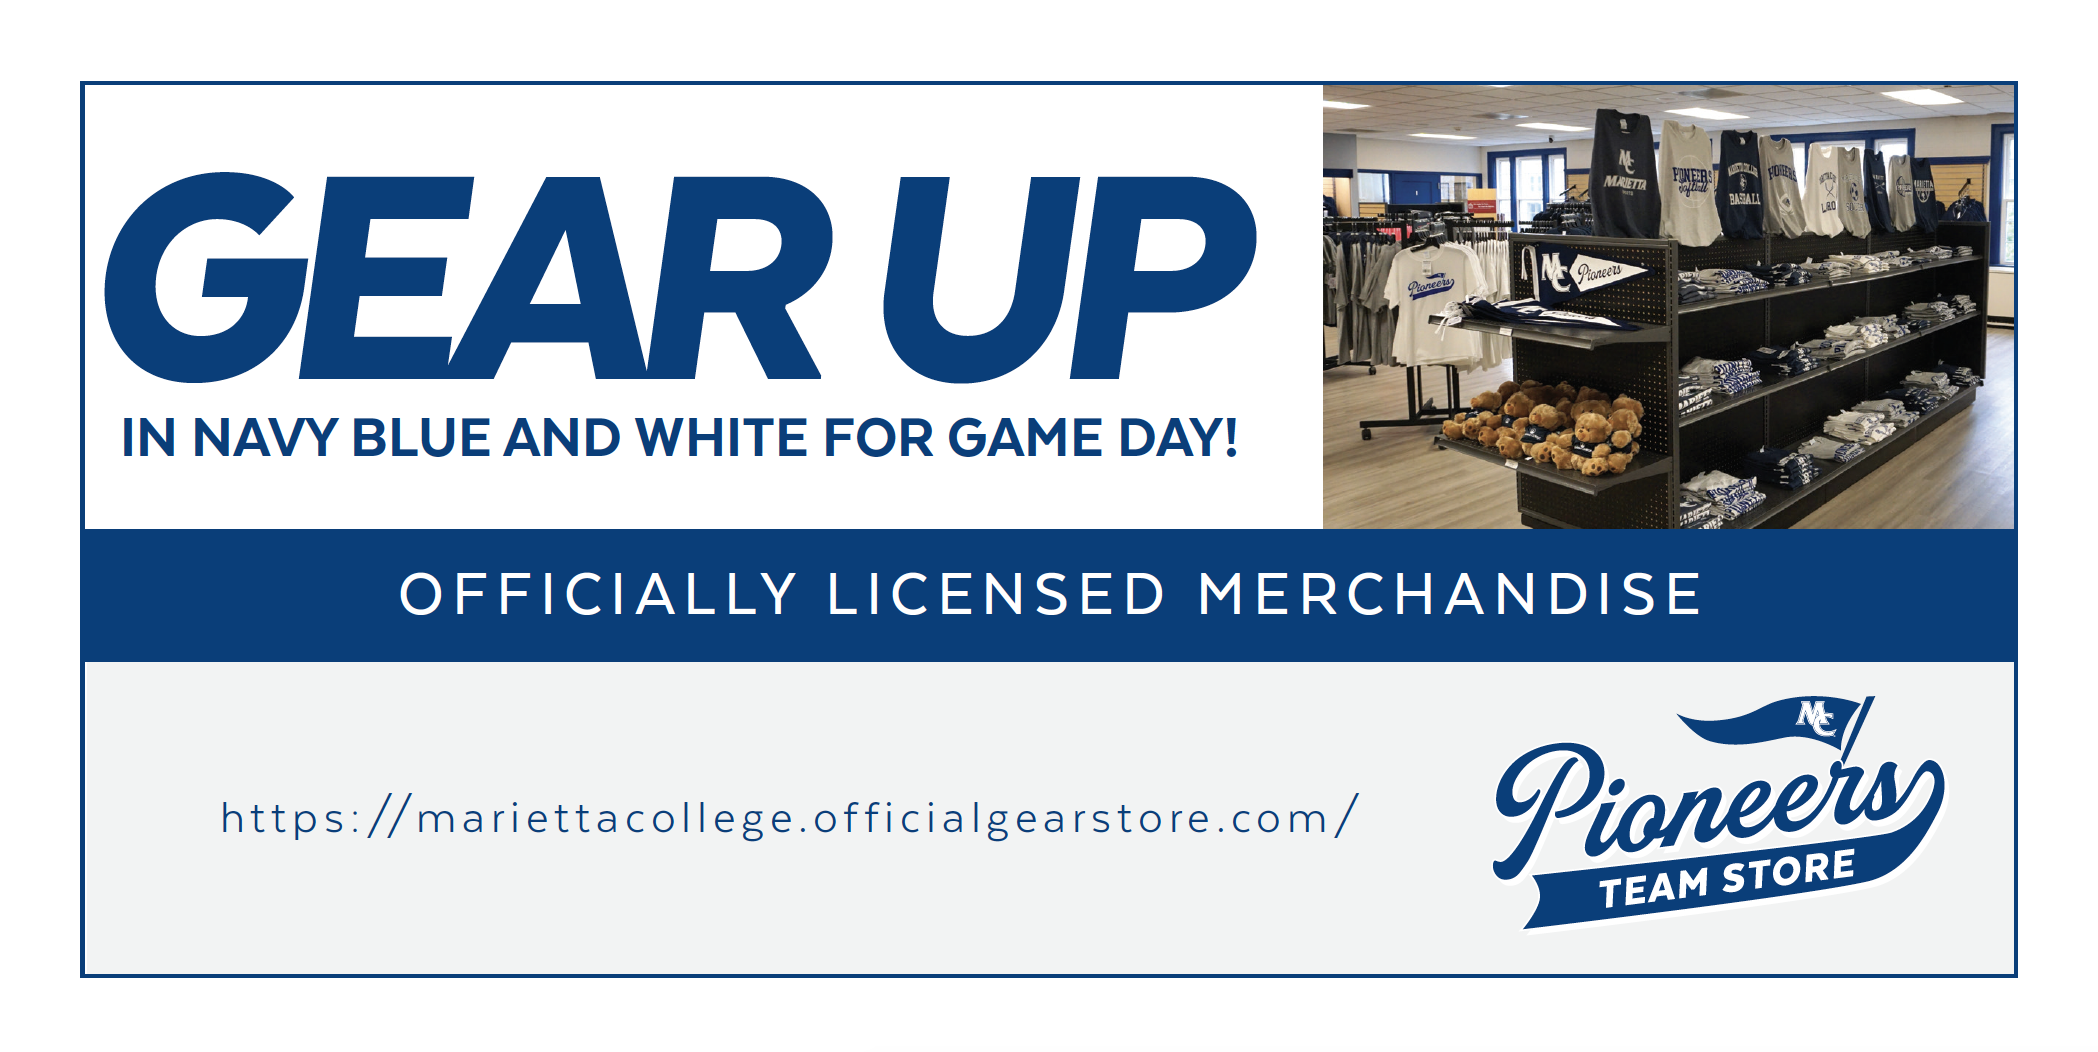 Graphic with text: GEAR UP IN NAVY BLUE AND WHITE FOR GAME DAY! OFFICIALLY LICENSED MERCHANDISE with link and logo to Pioneers team Store